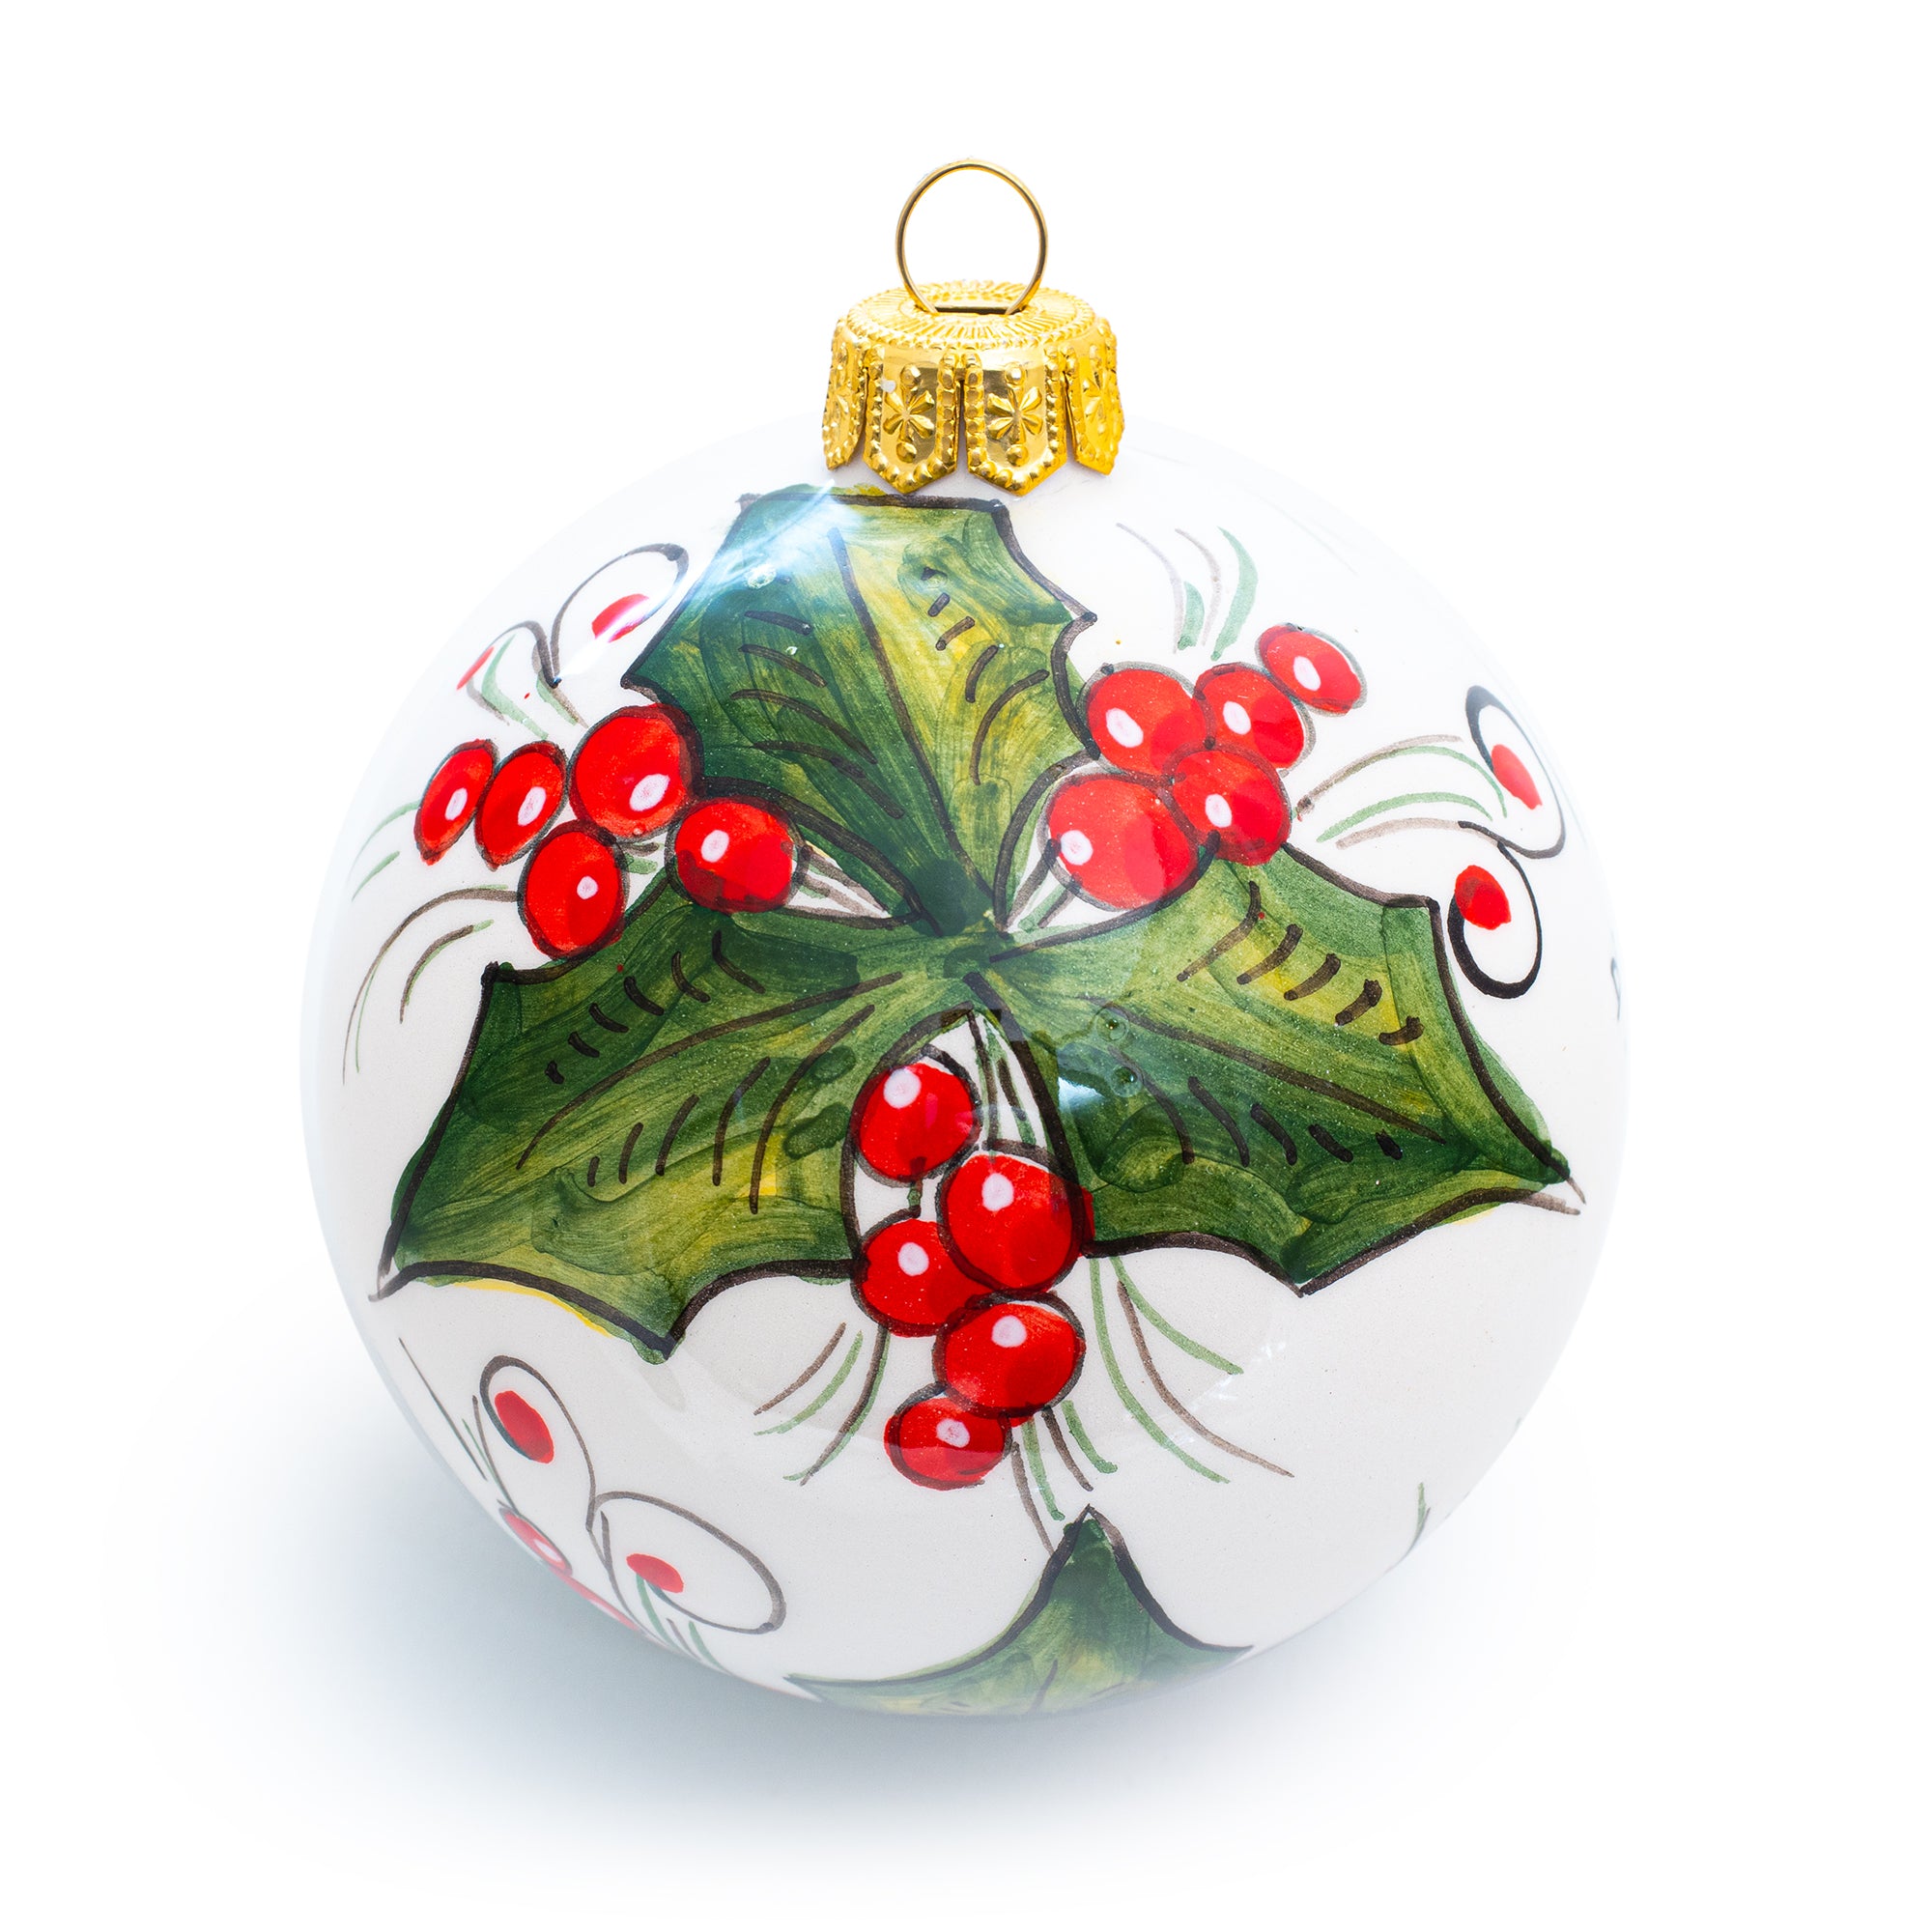 Pia's Holly Ornament, ceramics, pottery, italian design, majolica, handmade, handcrafted, handpainted, home decor, kitchen art, home goods, deruta, majolica, Artisan, treasures, traditional art, modern art, gift ideas, style, SF, shop small business, artists, shop online, landmark store, legacy, one of a kind, limited edition, gift guide, gift shop, retail shop, decorations, shopping, italy, home staging, home decorating, home interiors